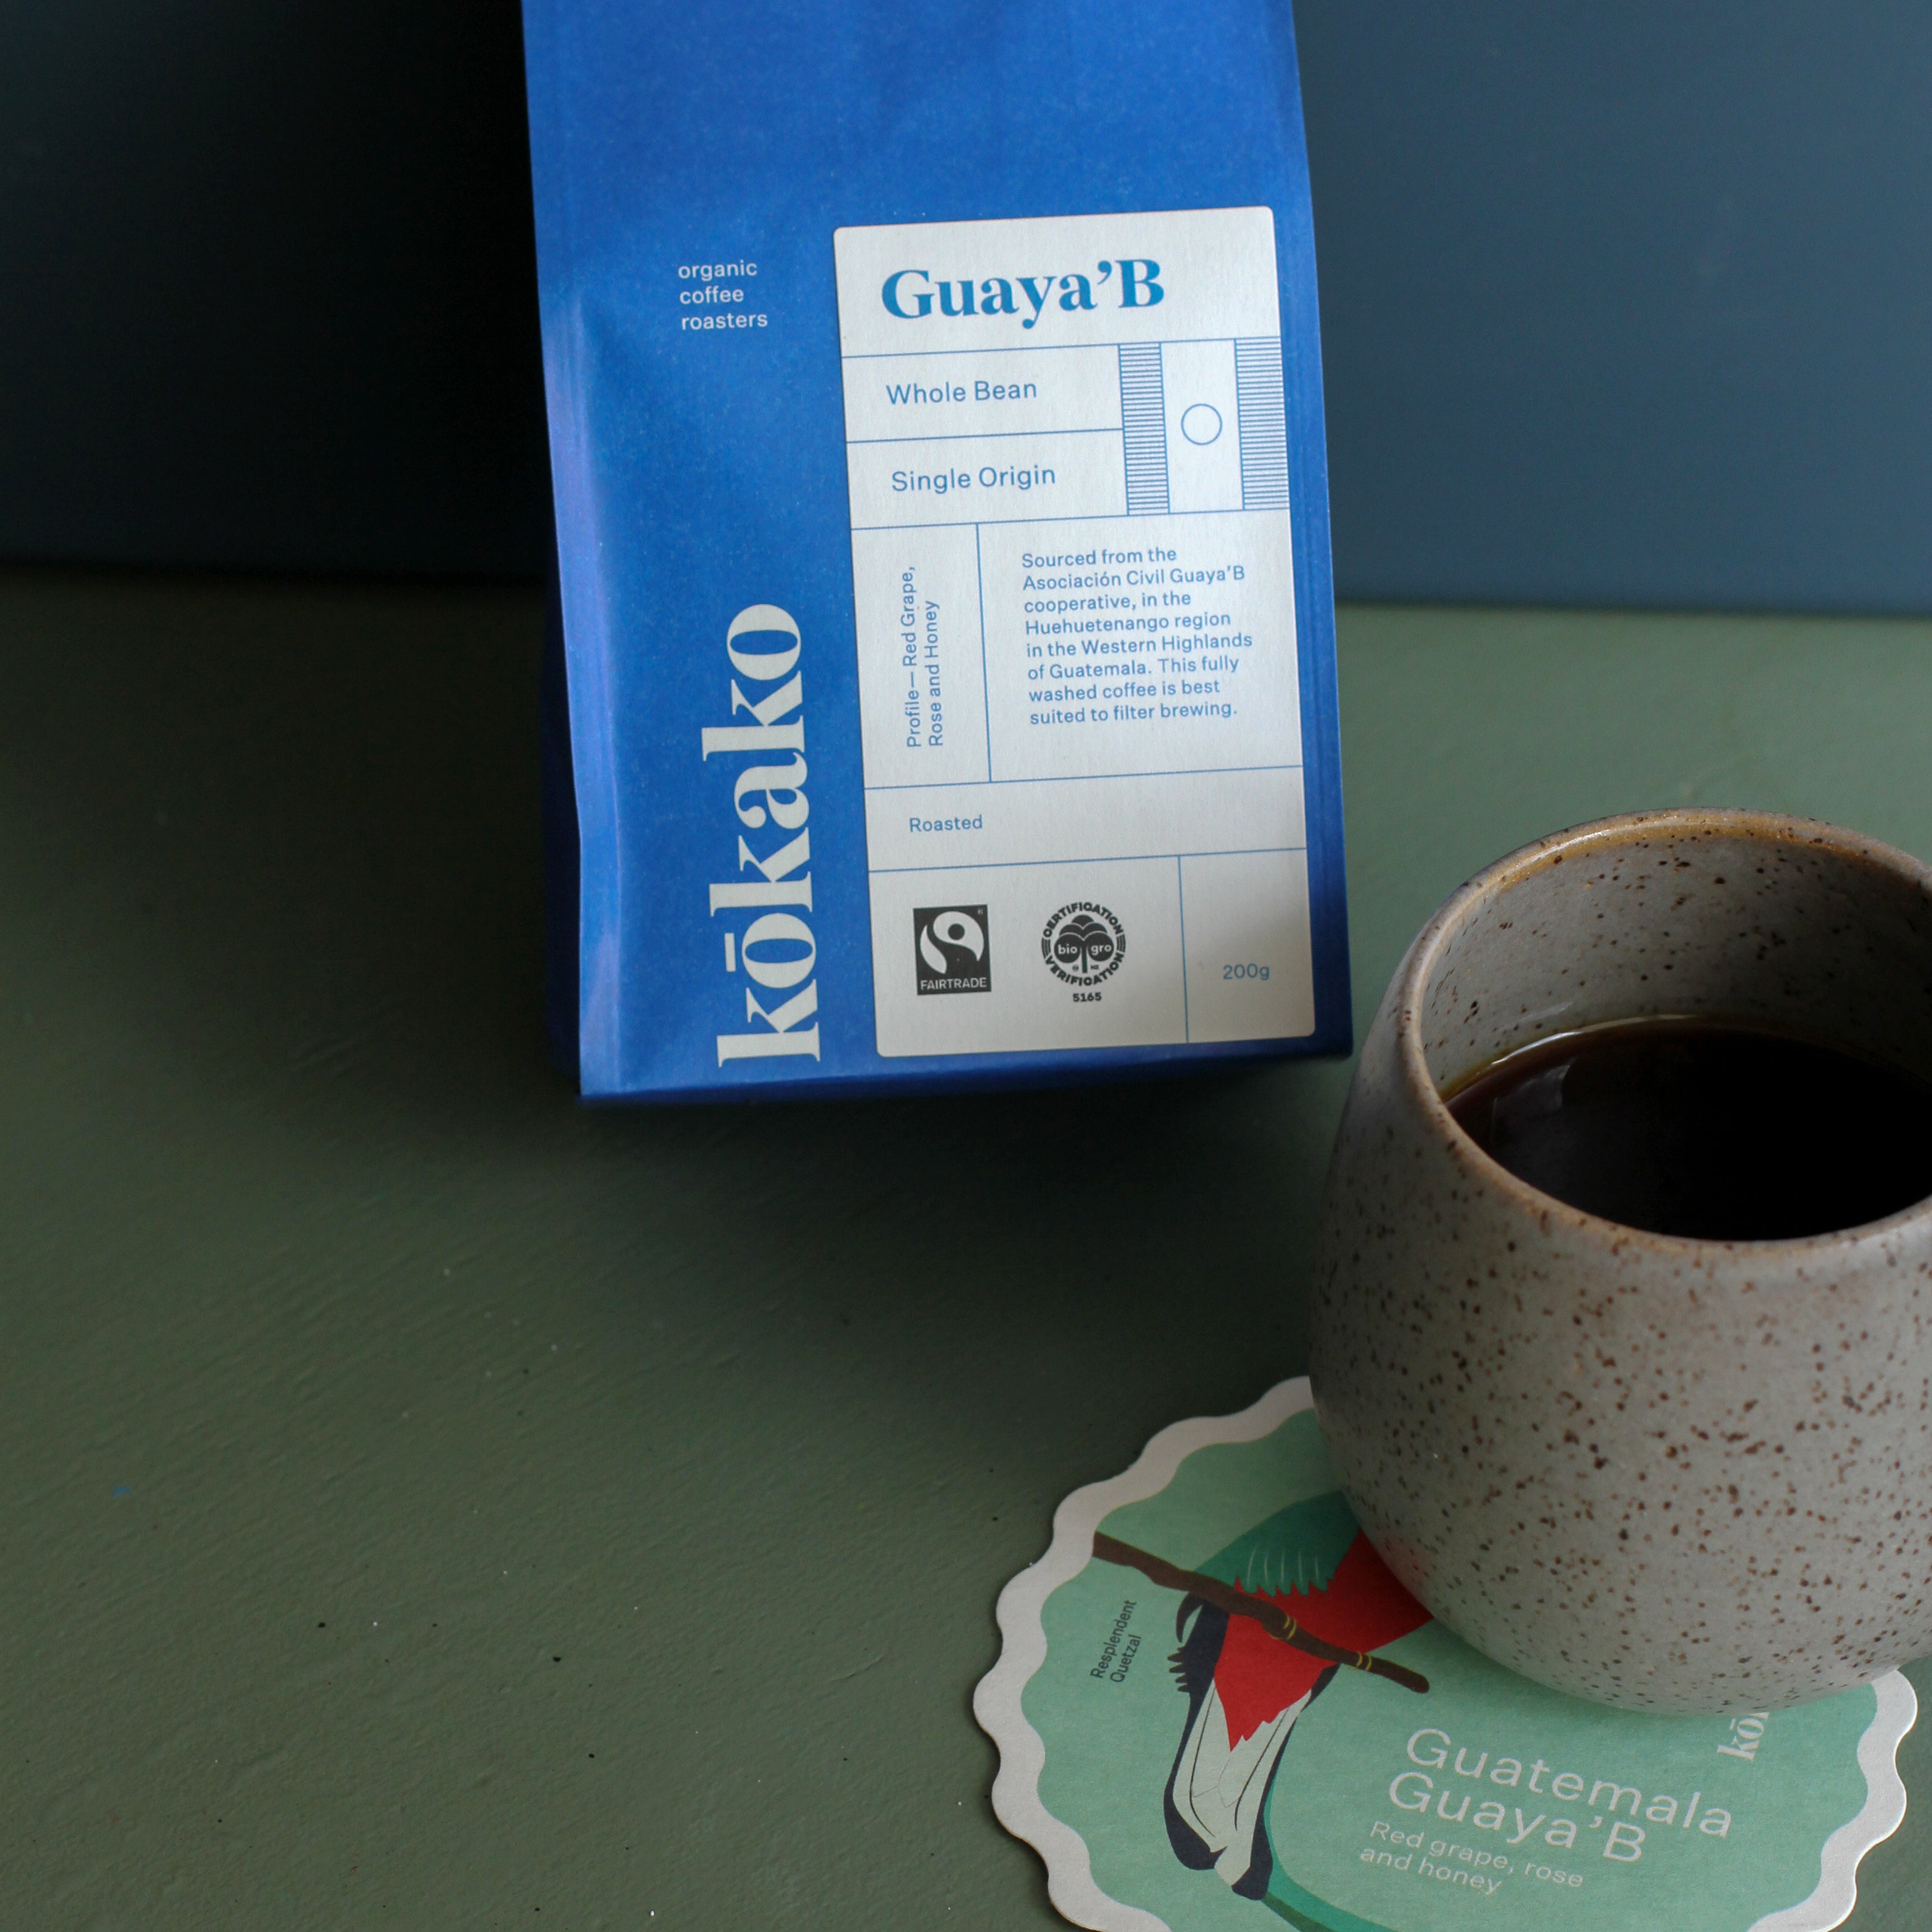 New Release — Get a load of our Guatemala Guaya'B